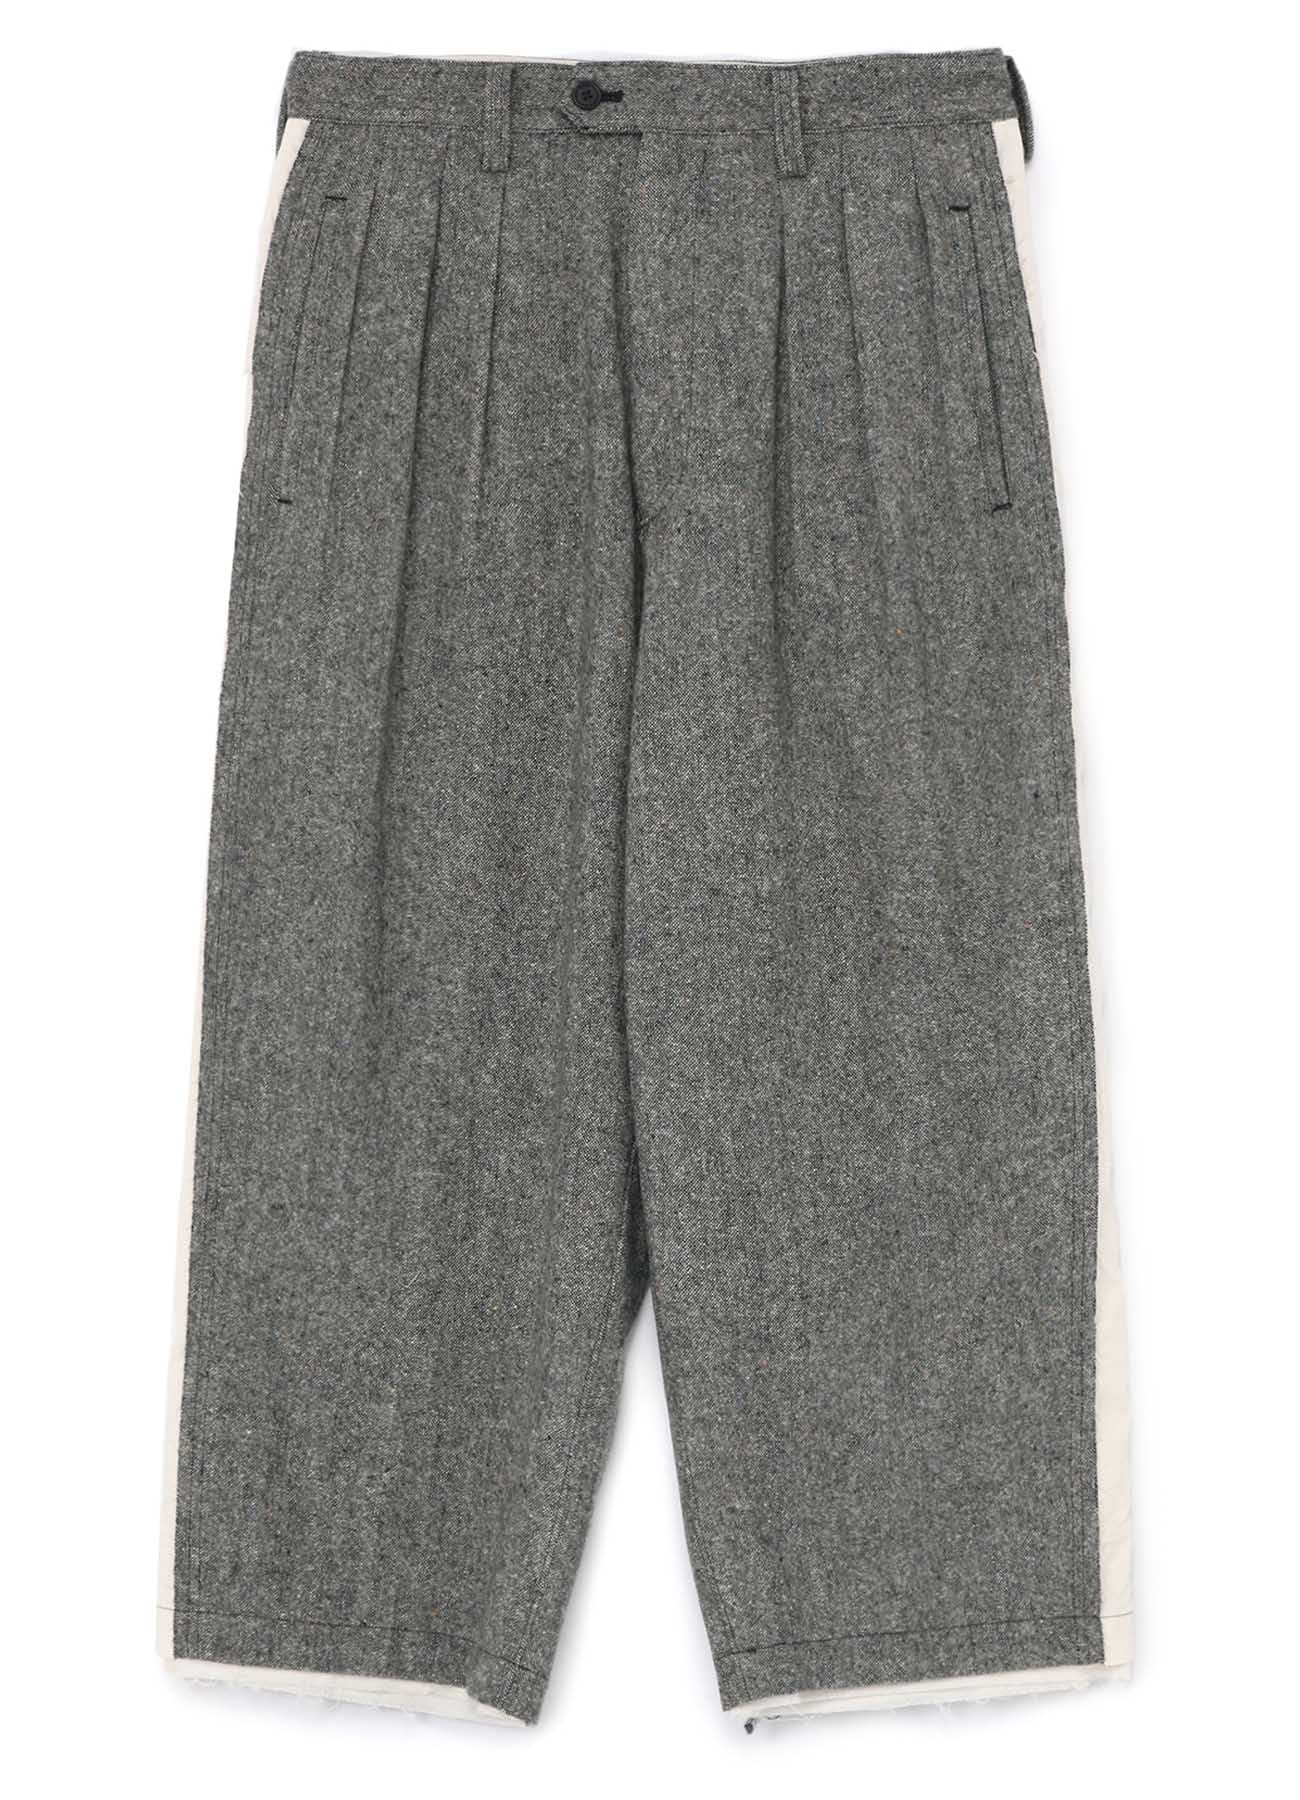 ETERMINE NEP TWEED+COTTON TWILL SIDE SWITCHING PANTS